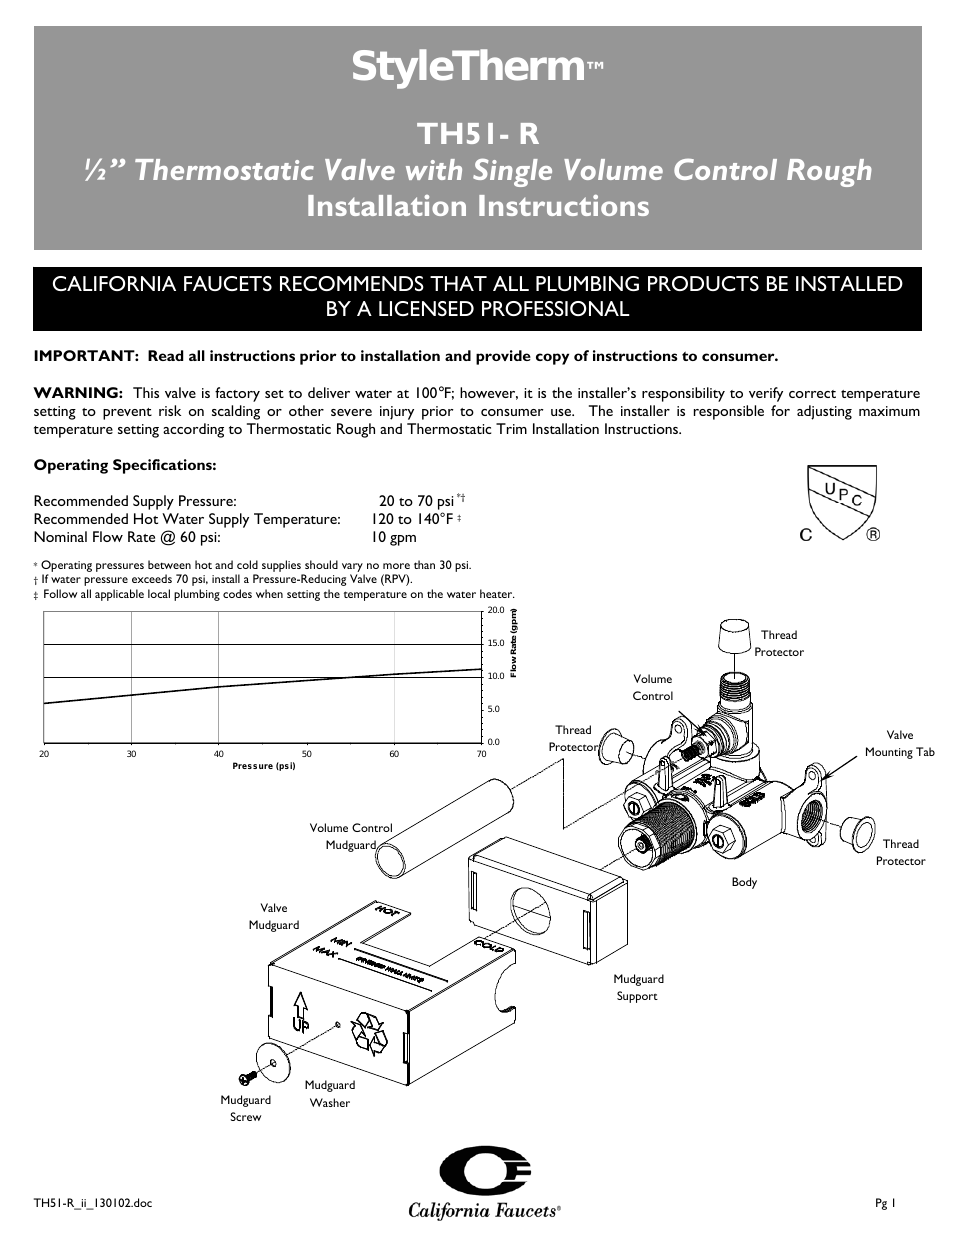 Styletherm 1/ Thermostatic Rough Valve with Single Integral Volume Control